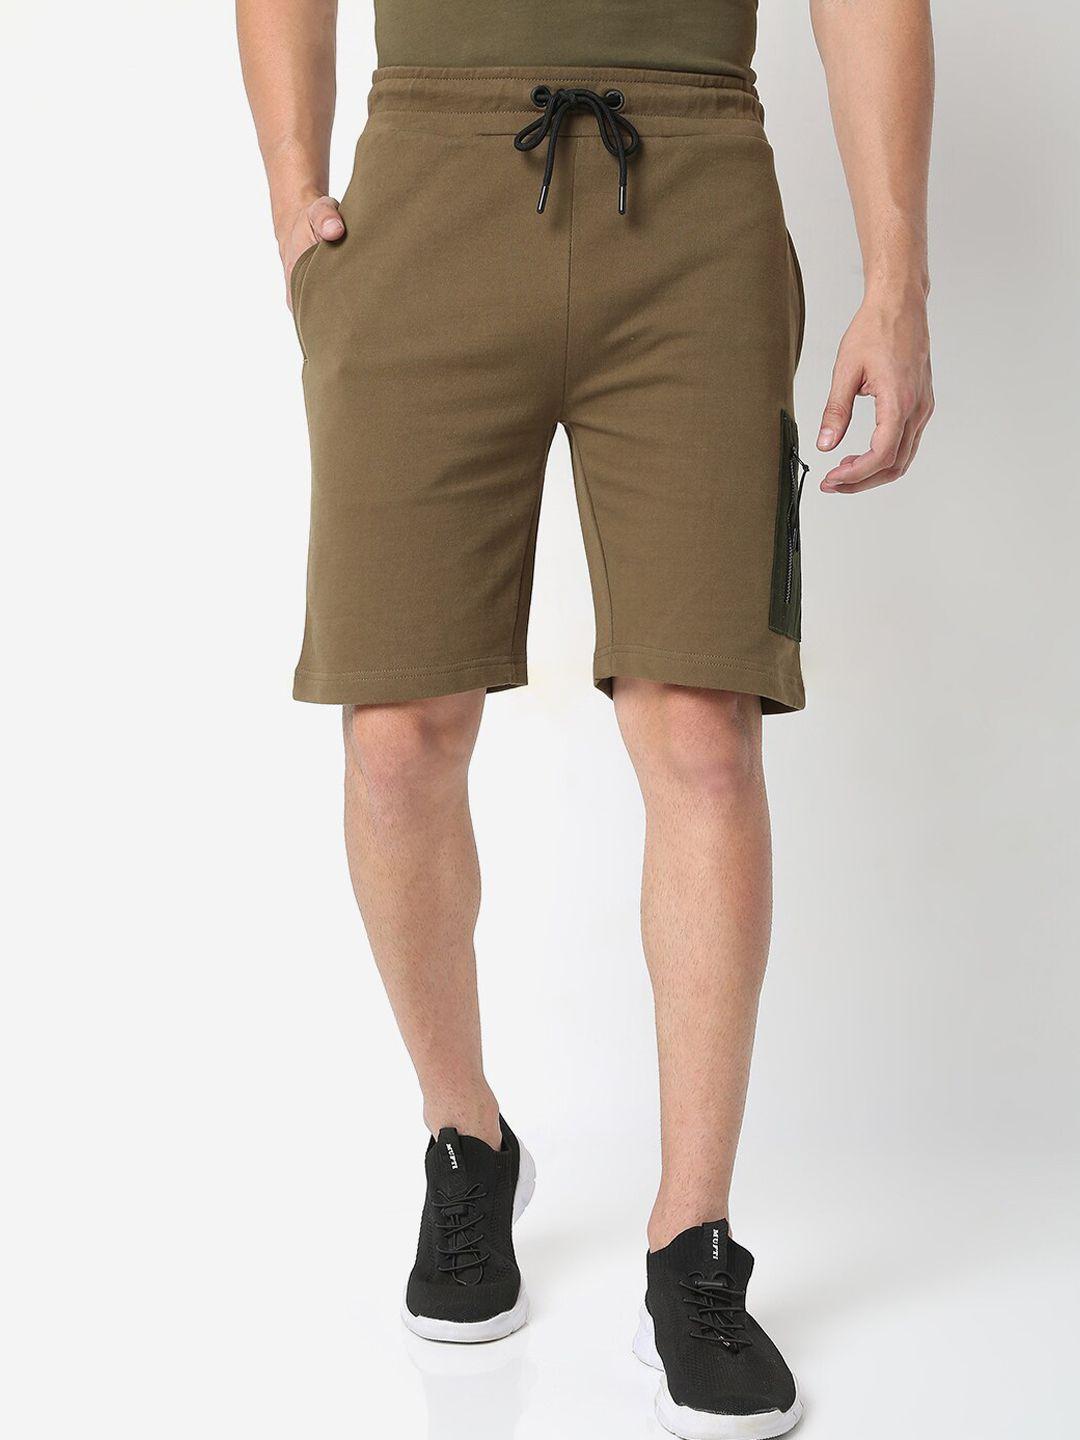 mufti-men-olive-green-slim-fit-outdoor-shorts